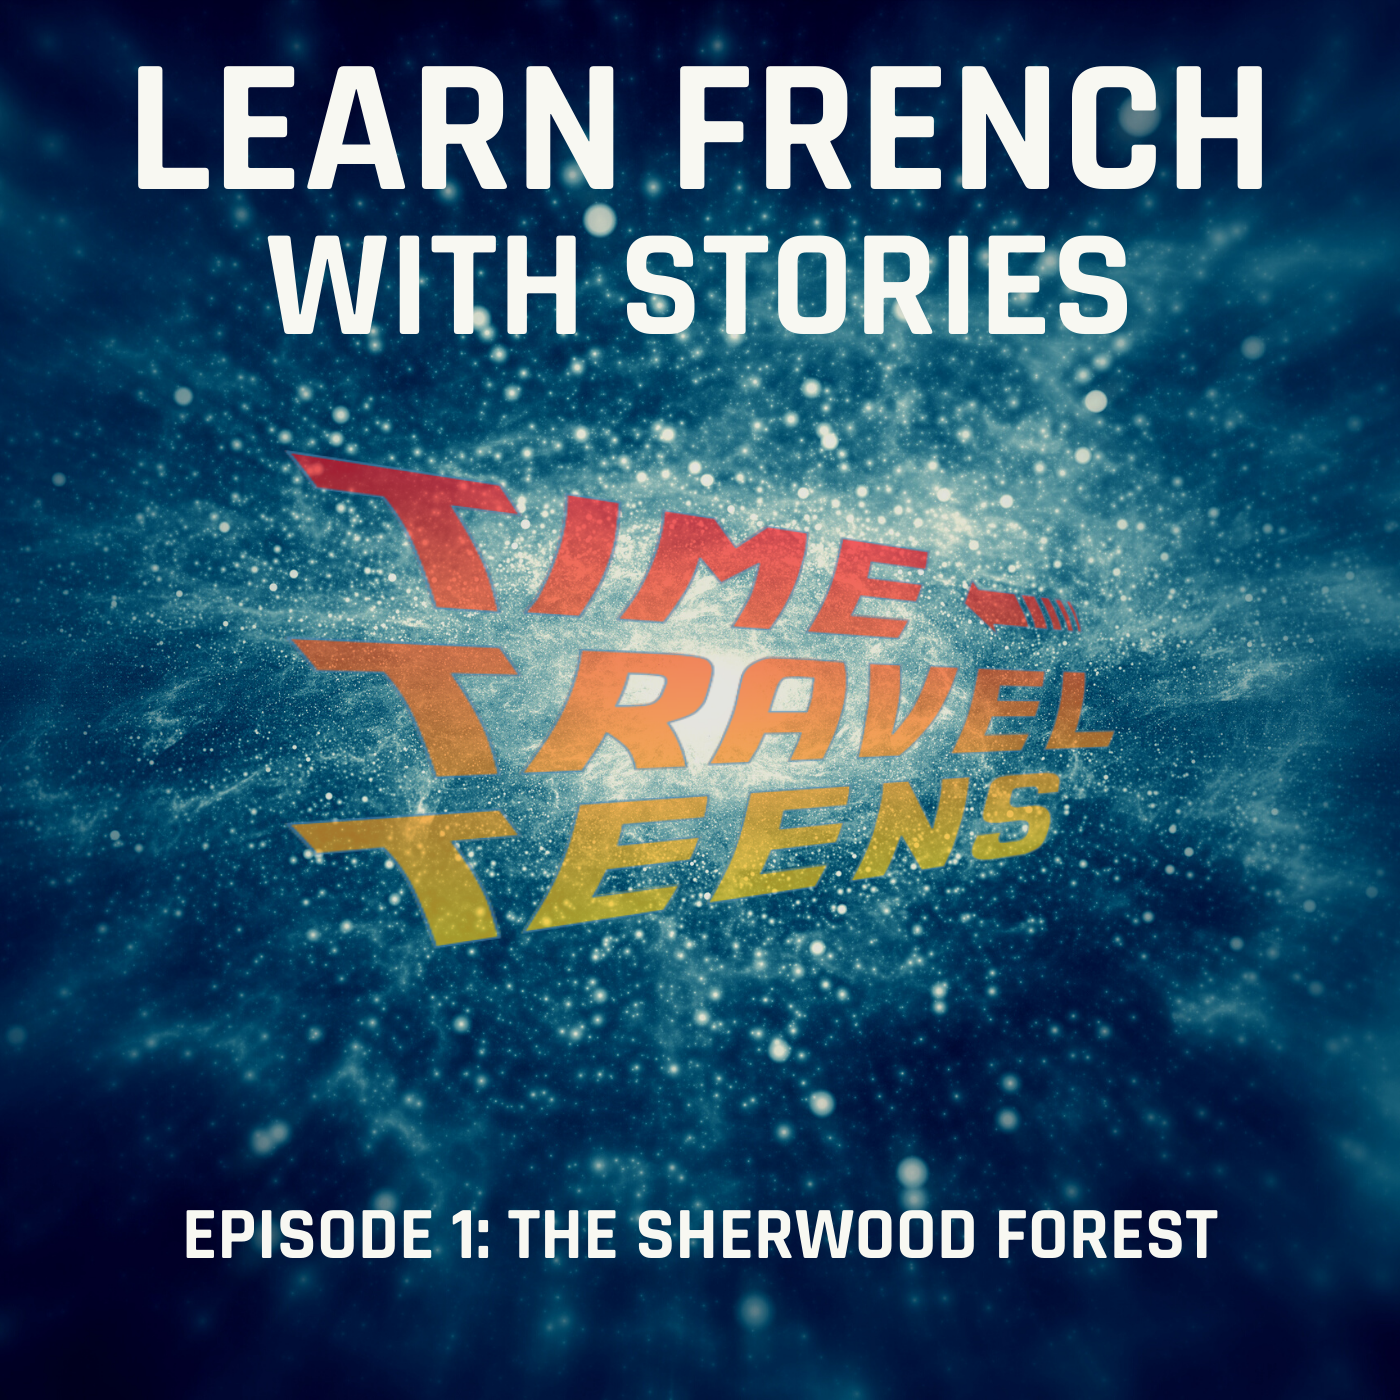 Learn French with Stories: Time Travel Teens, Episode 1 - The Sherwood Forest